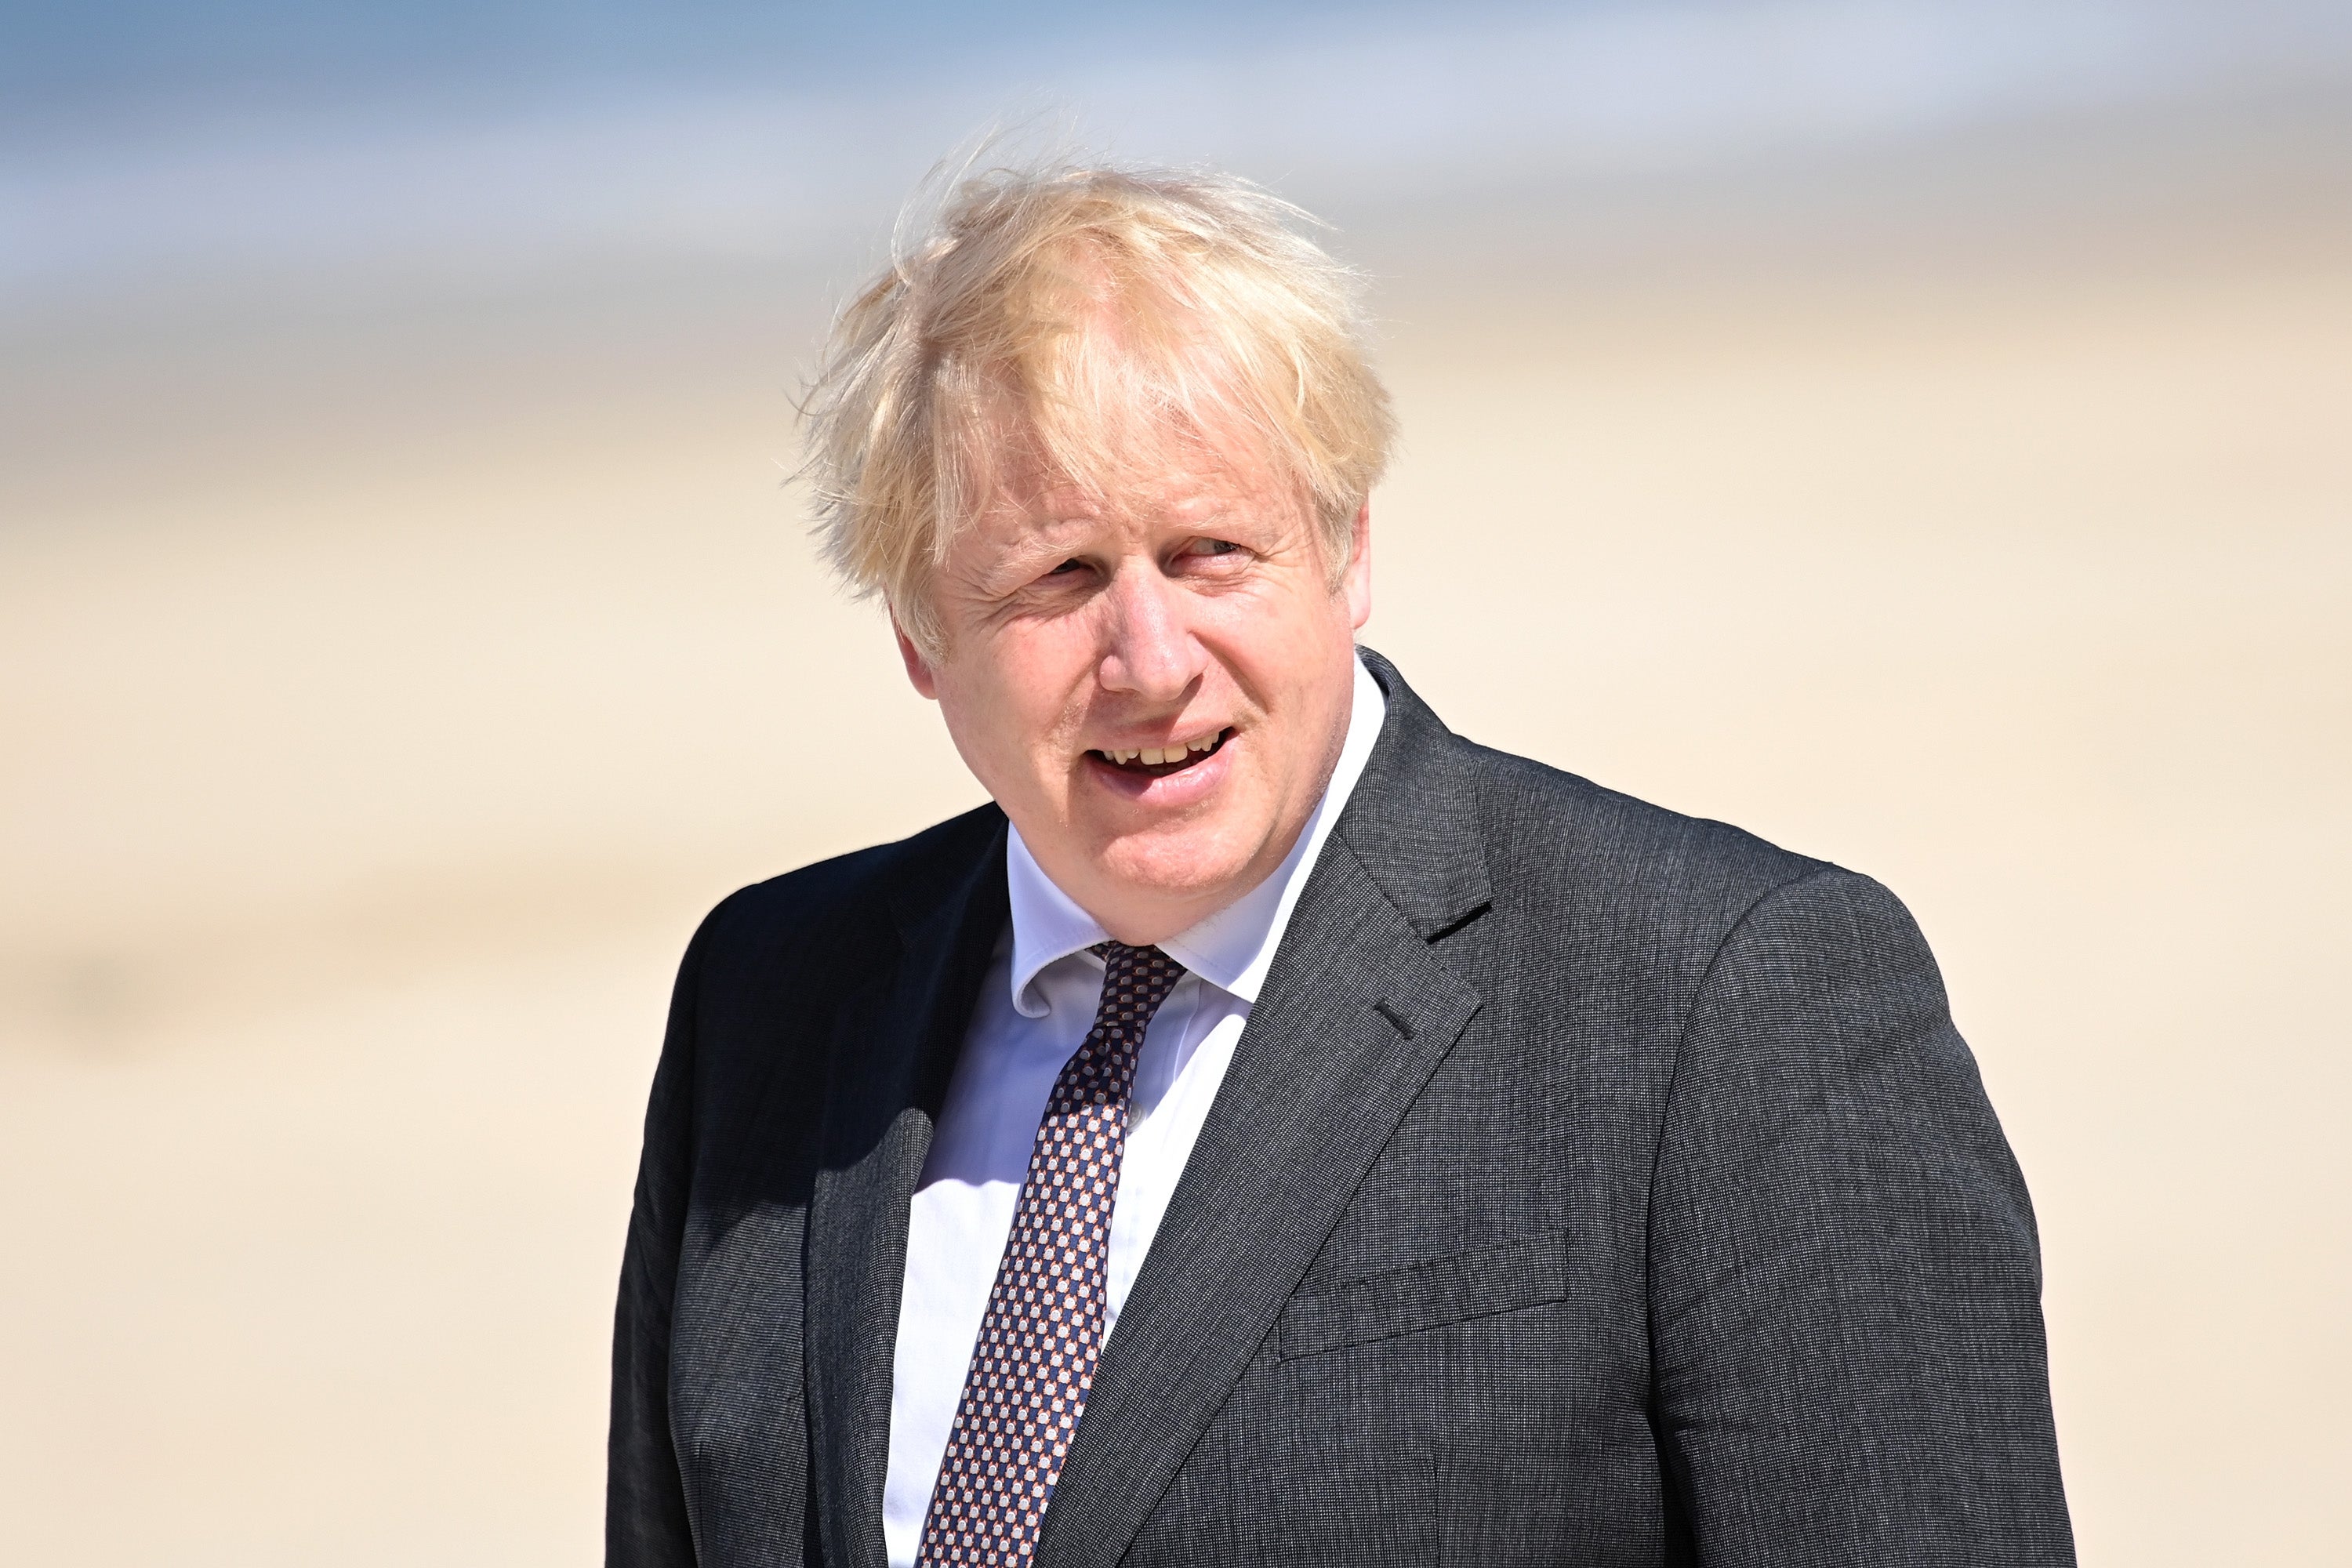 Boris Johnson launched a £500m Blue Planet Fund - but was accused of ‘reheated soundbites’